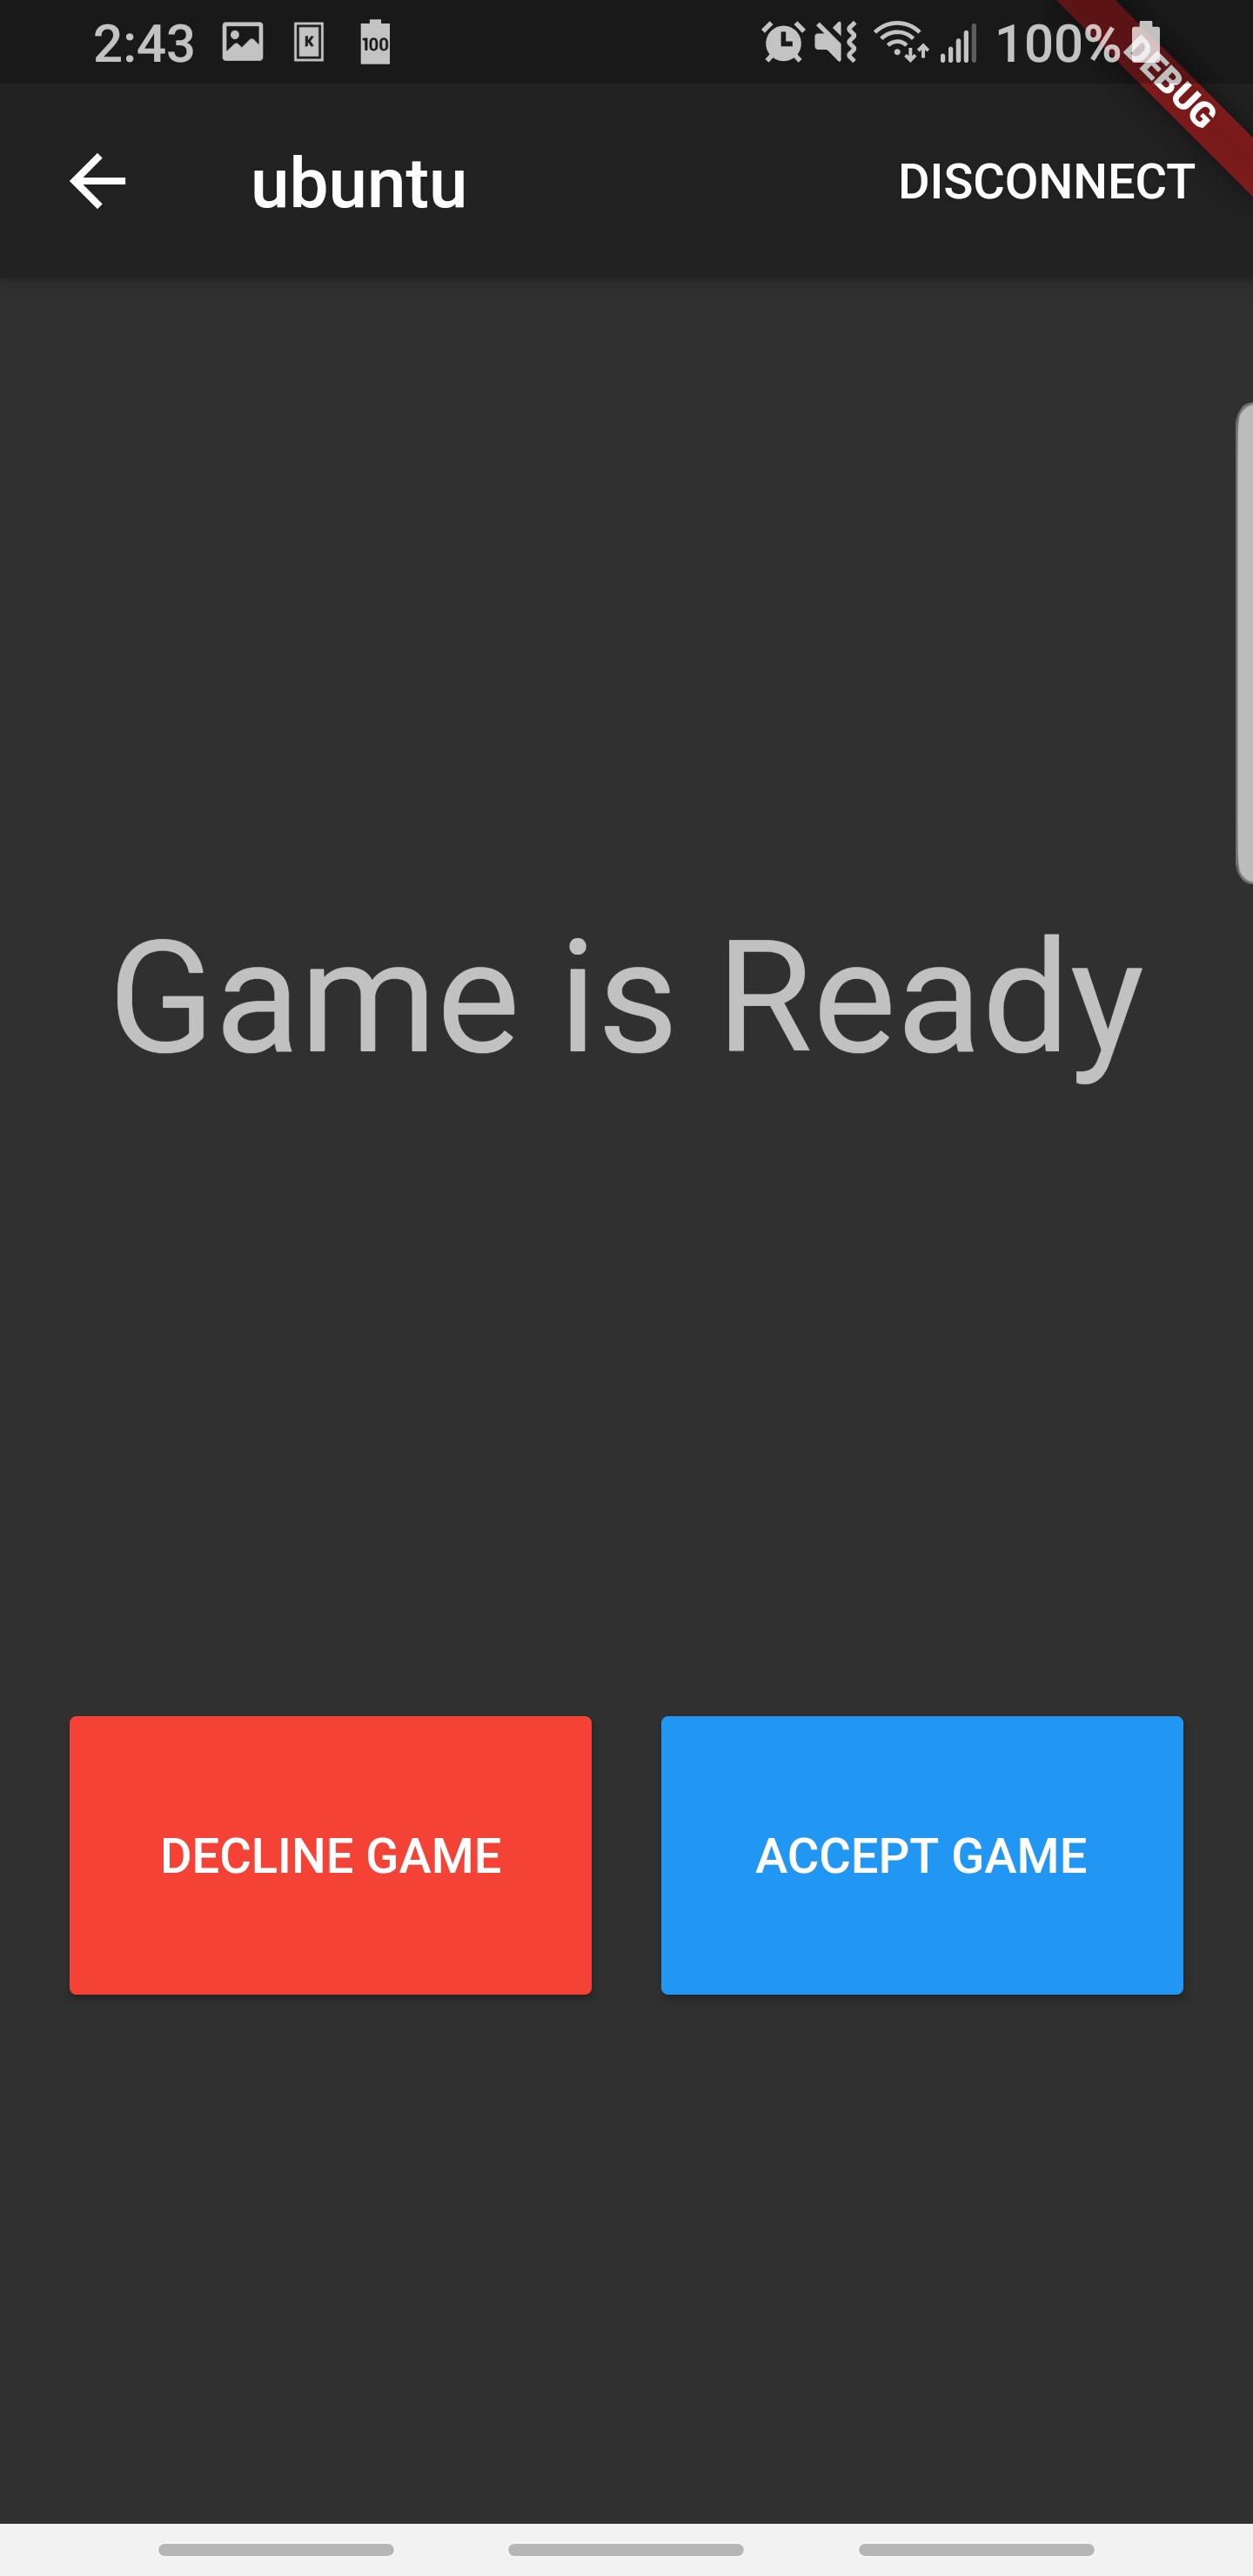 accept game prompt